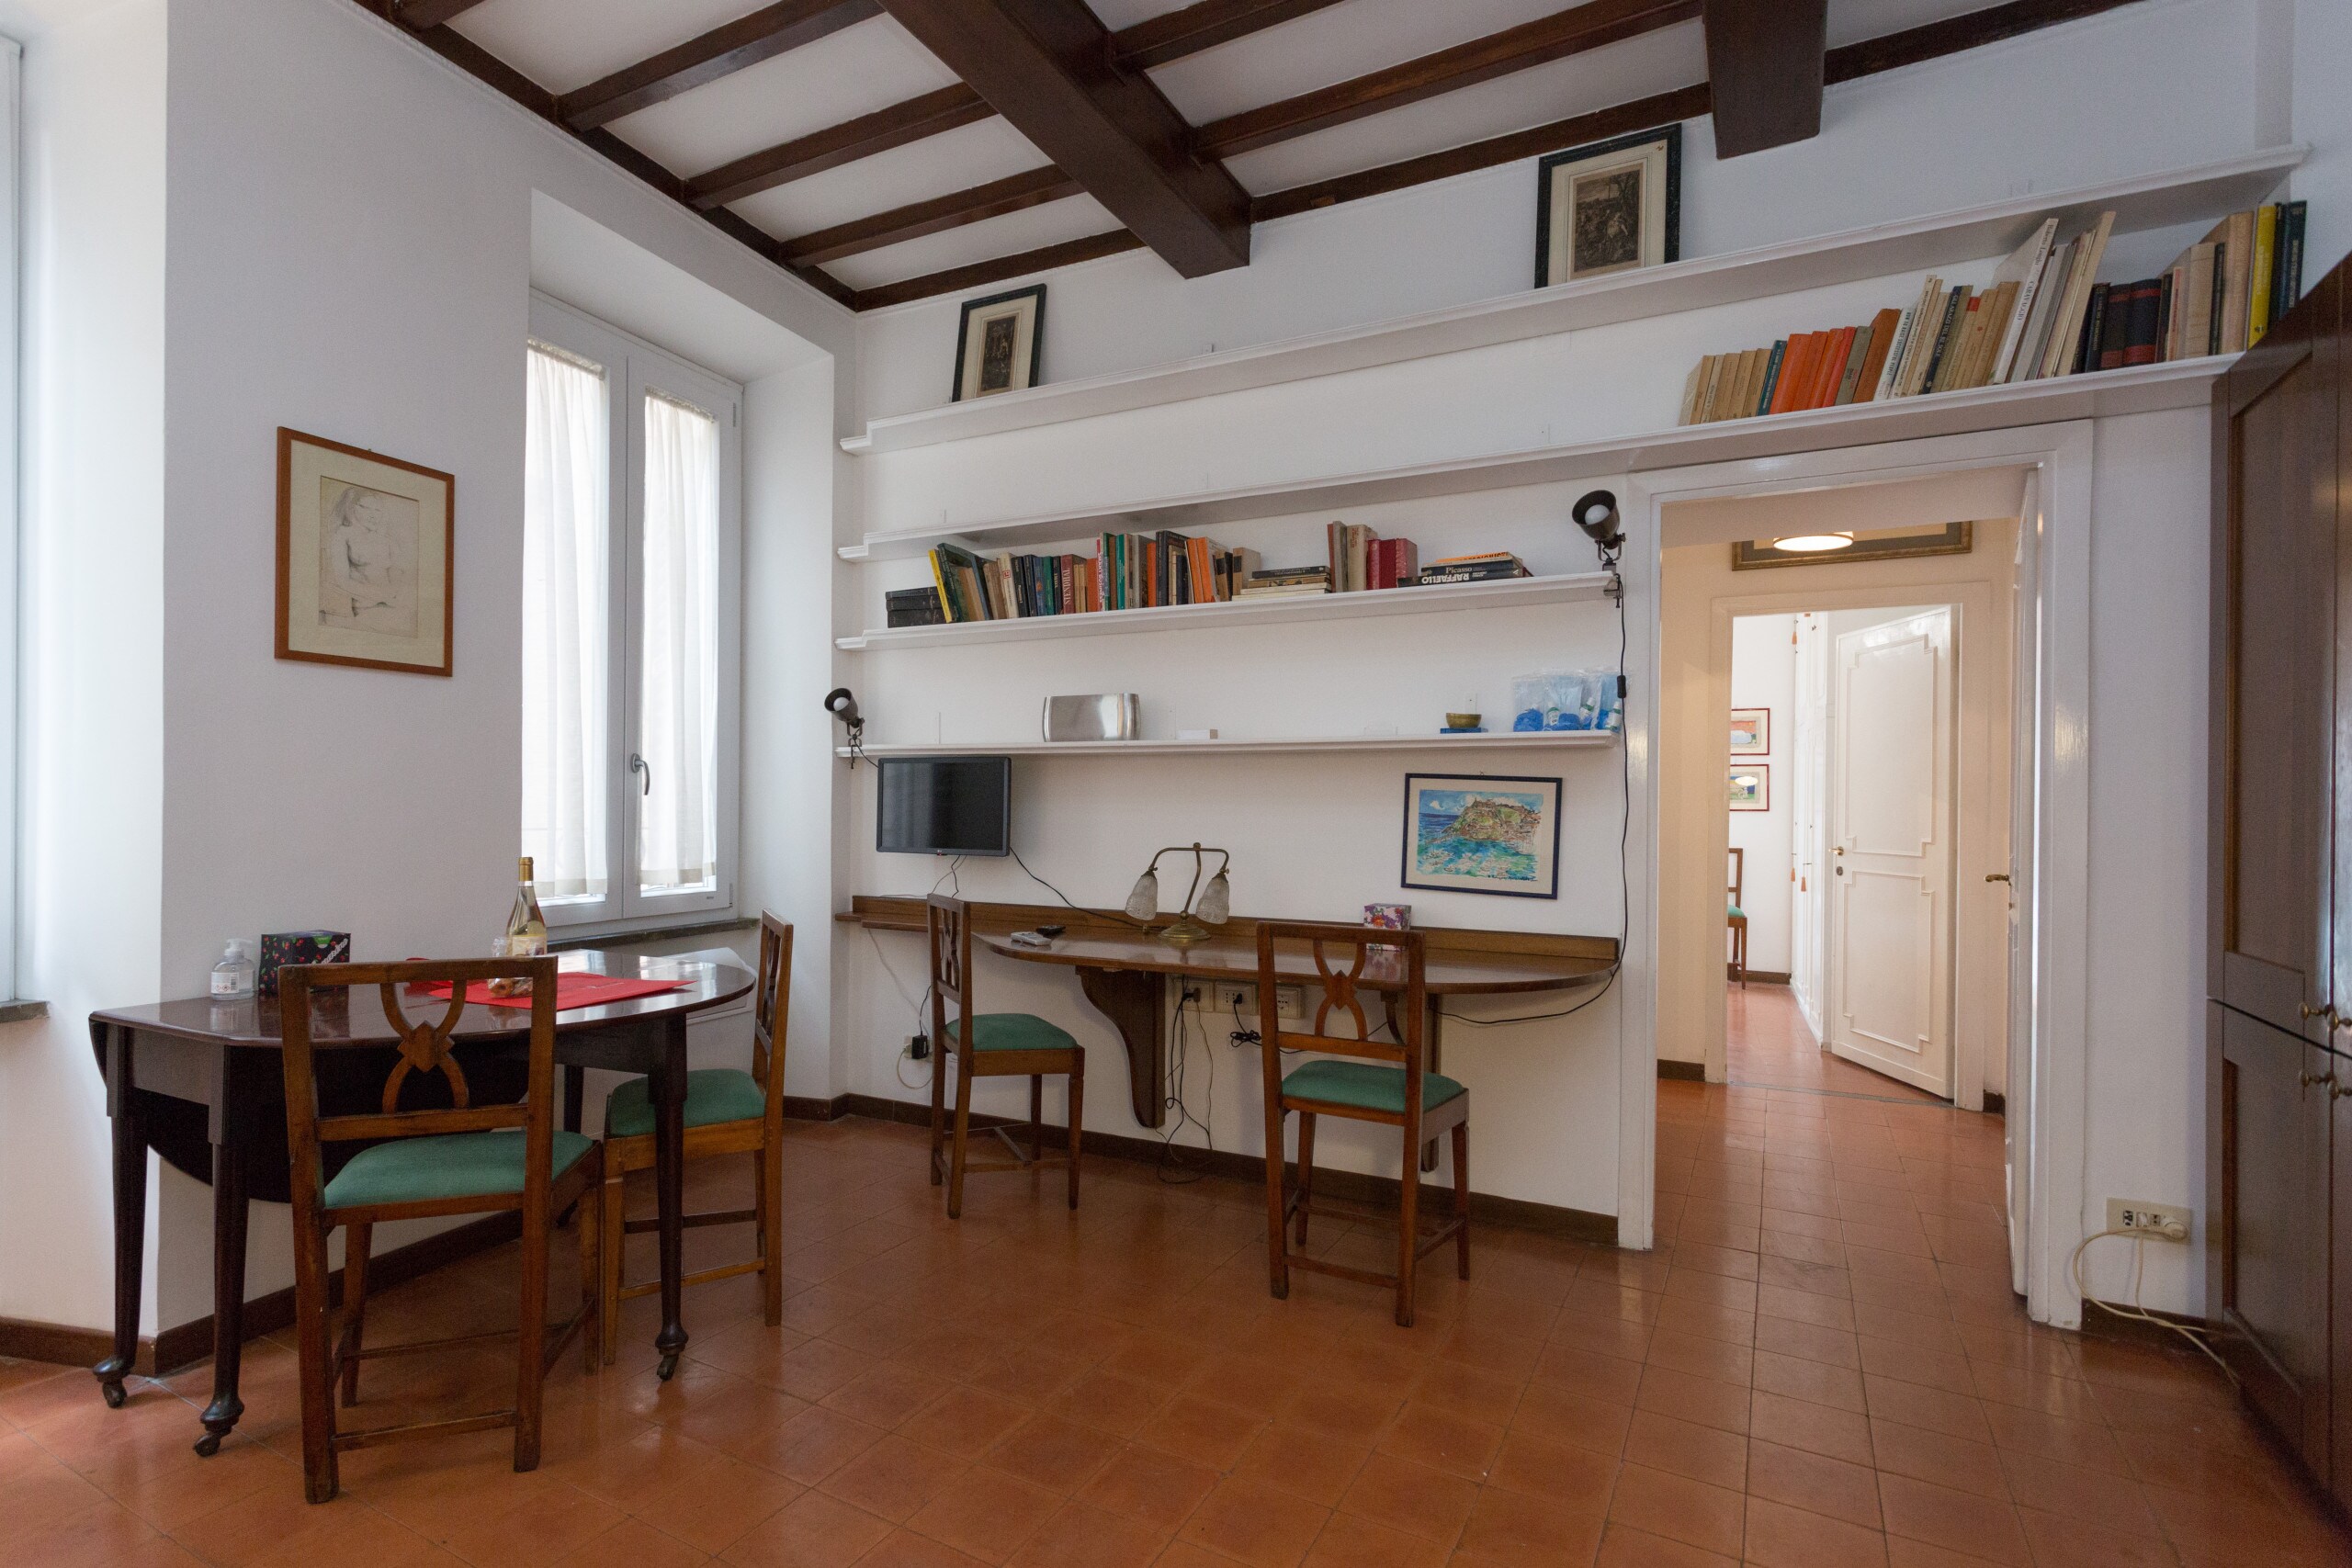 Property Image 2 - Bright Airy Flat next to Camp de Fiori and Nice Cafes